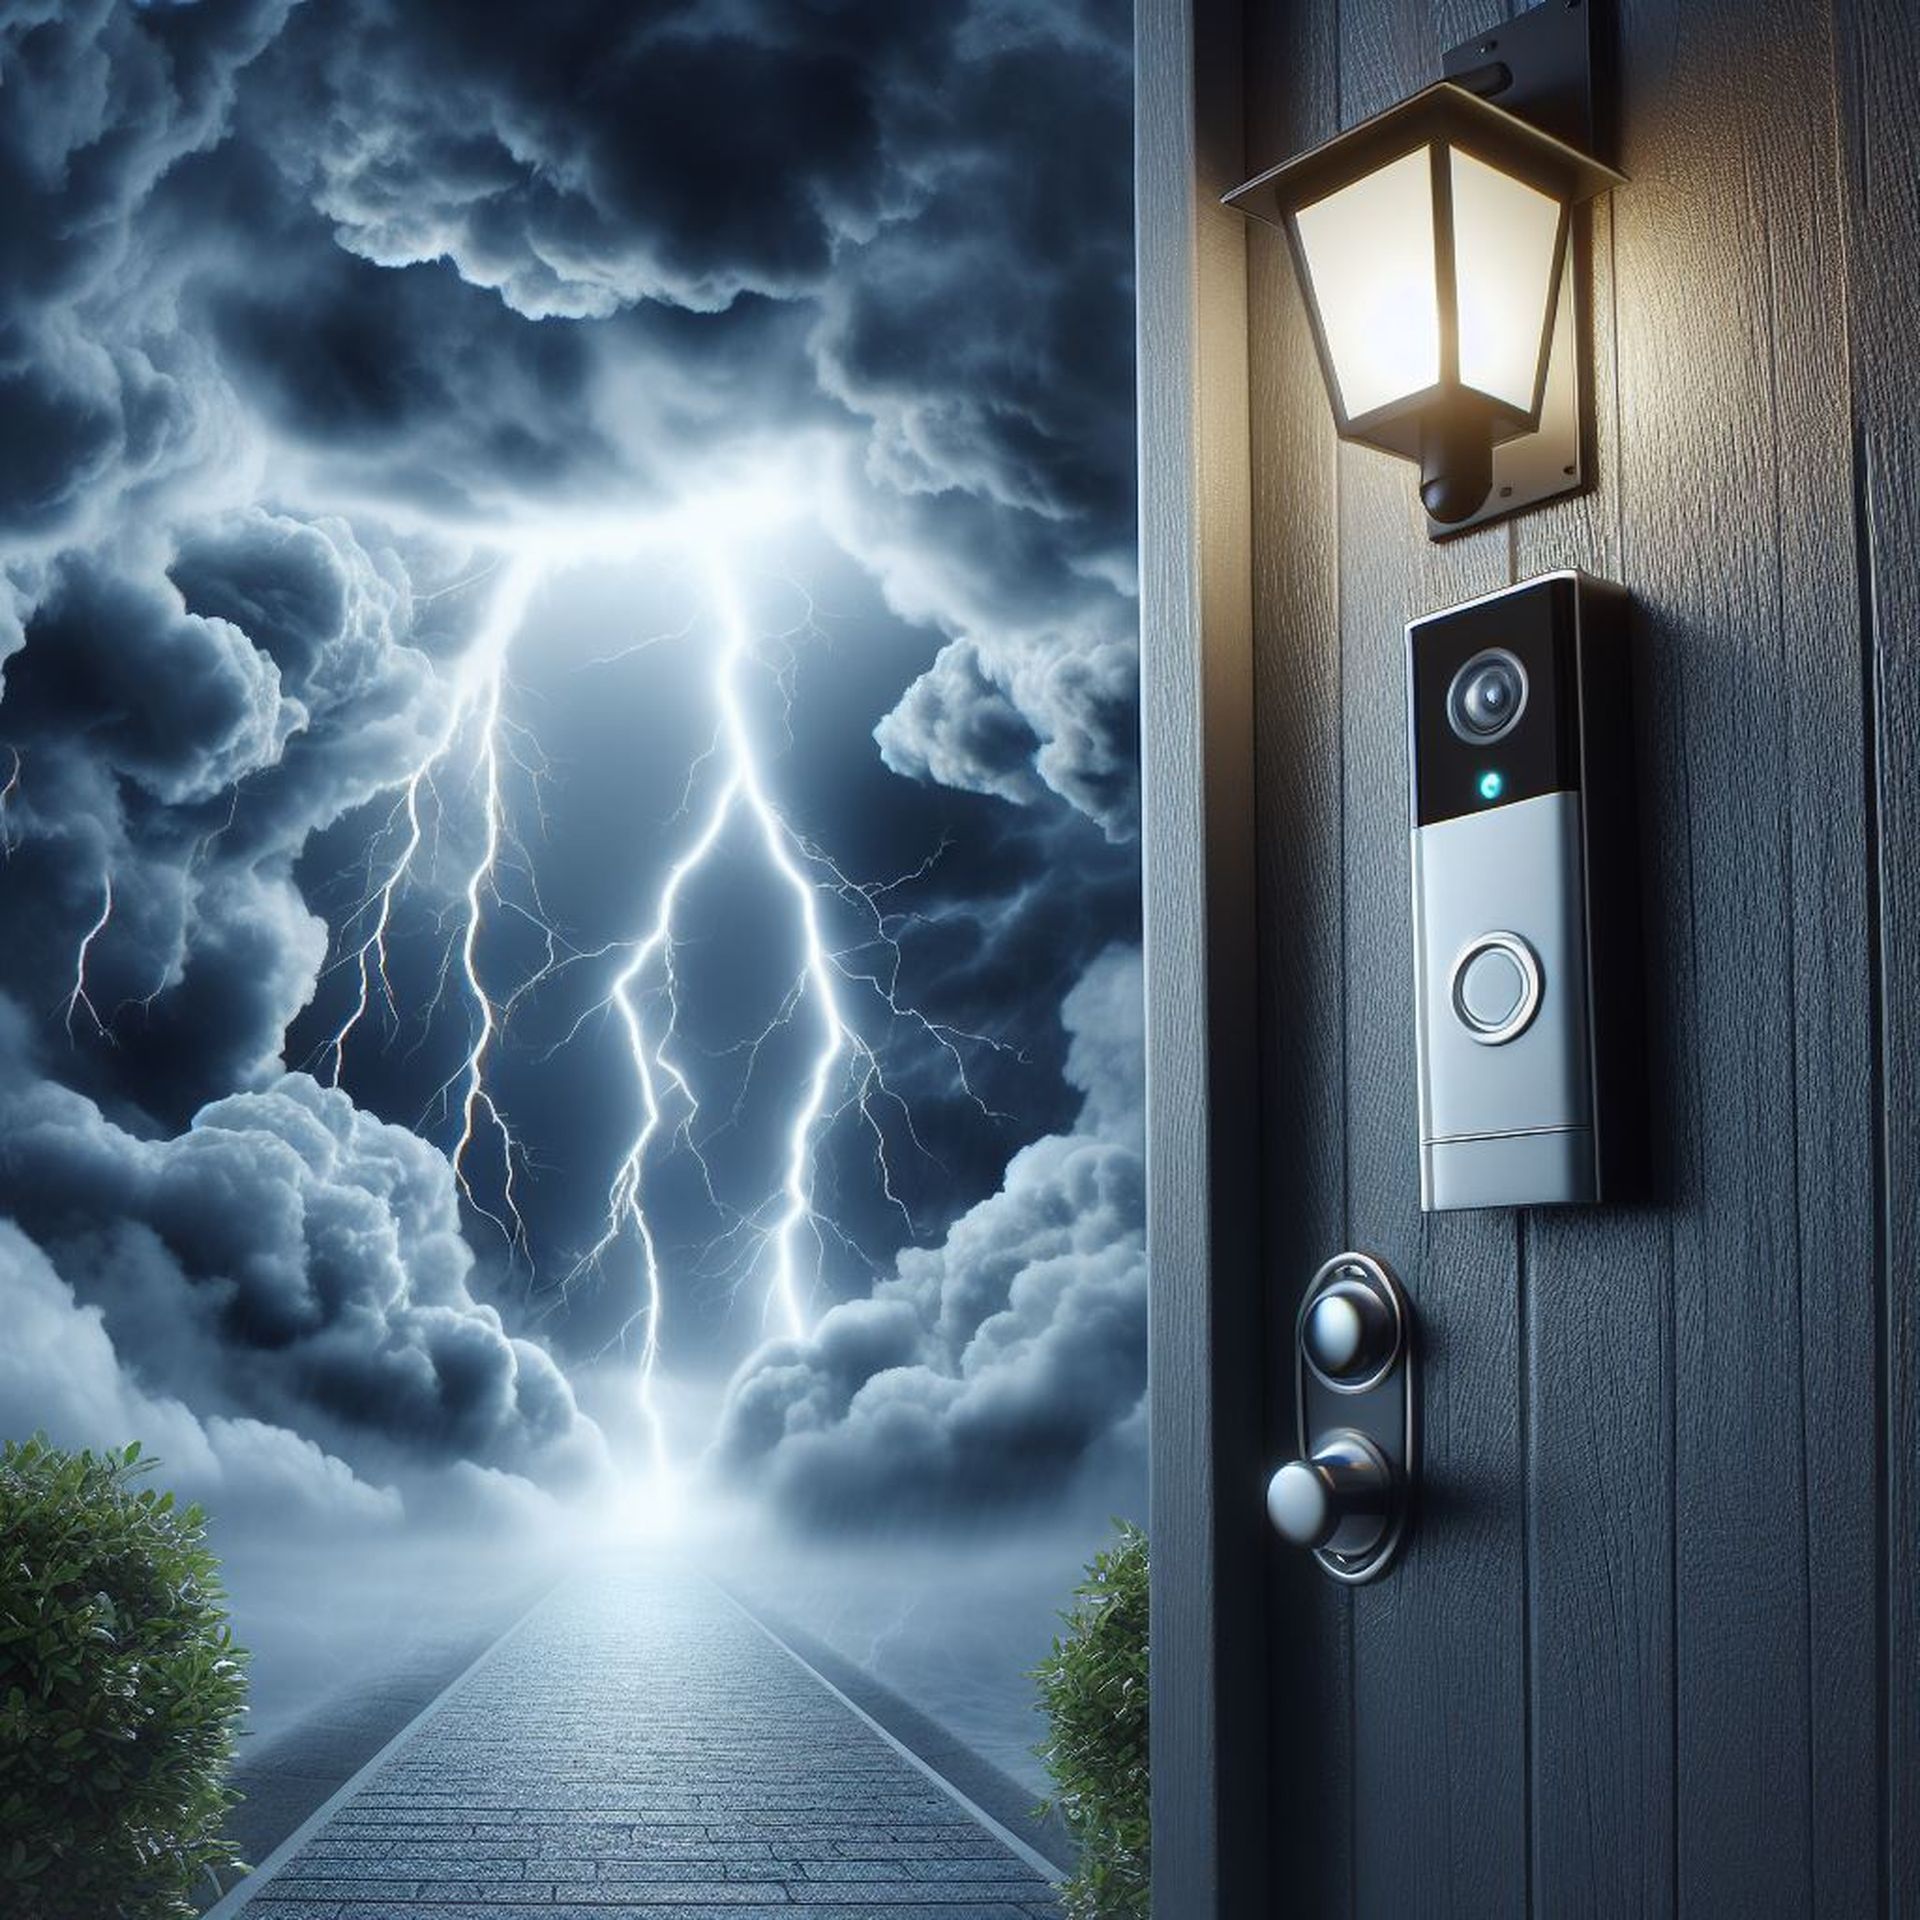 Discover flaws in certain video doorbells: lack of encryption exposes homes to snooping. Reports urges caution and steps for enhanced security